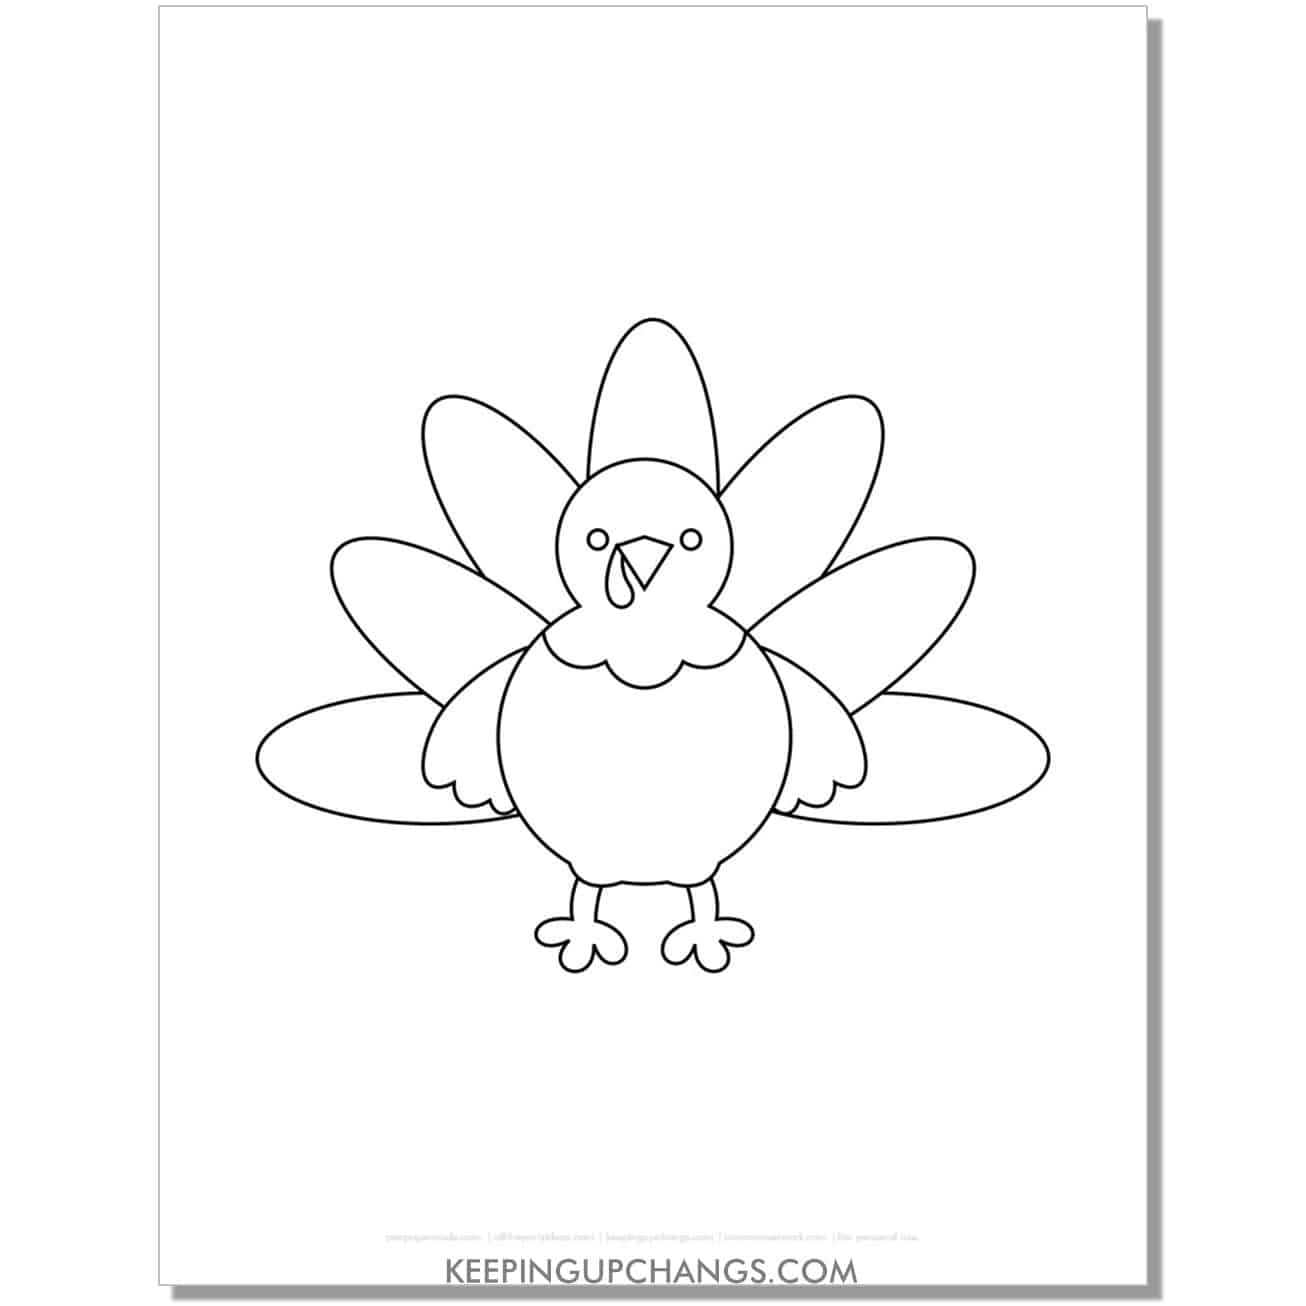 fat turkey with feathers for preschool, kindergarten, toddlers.